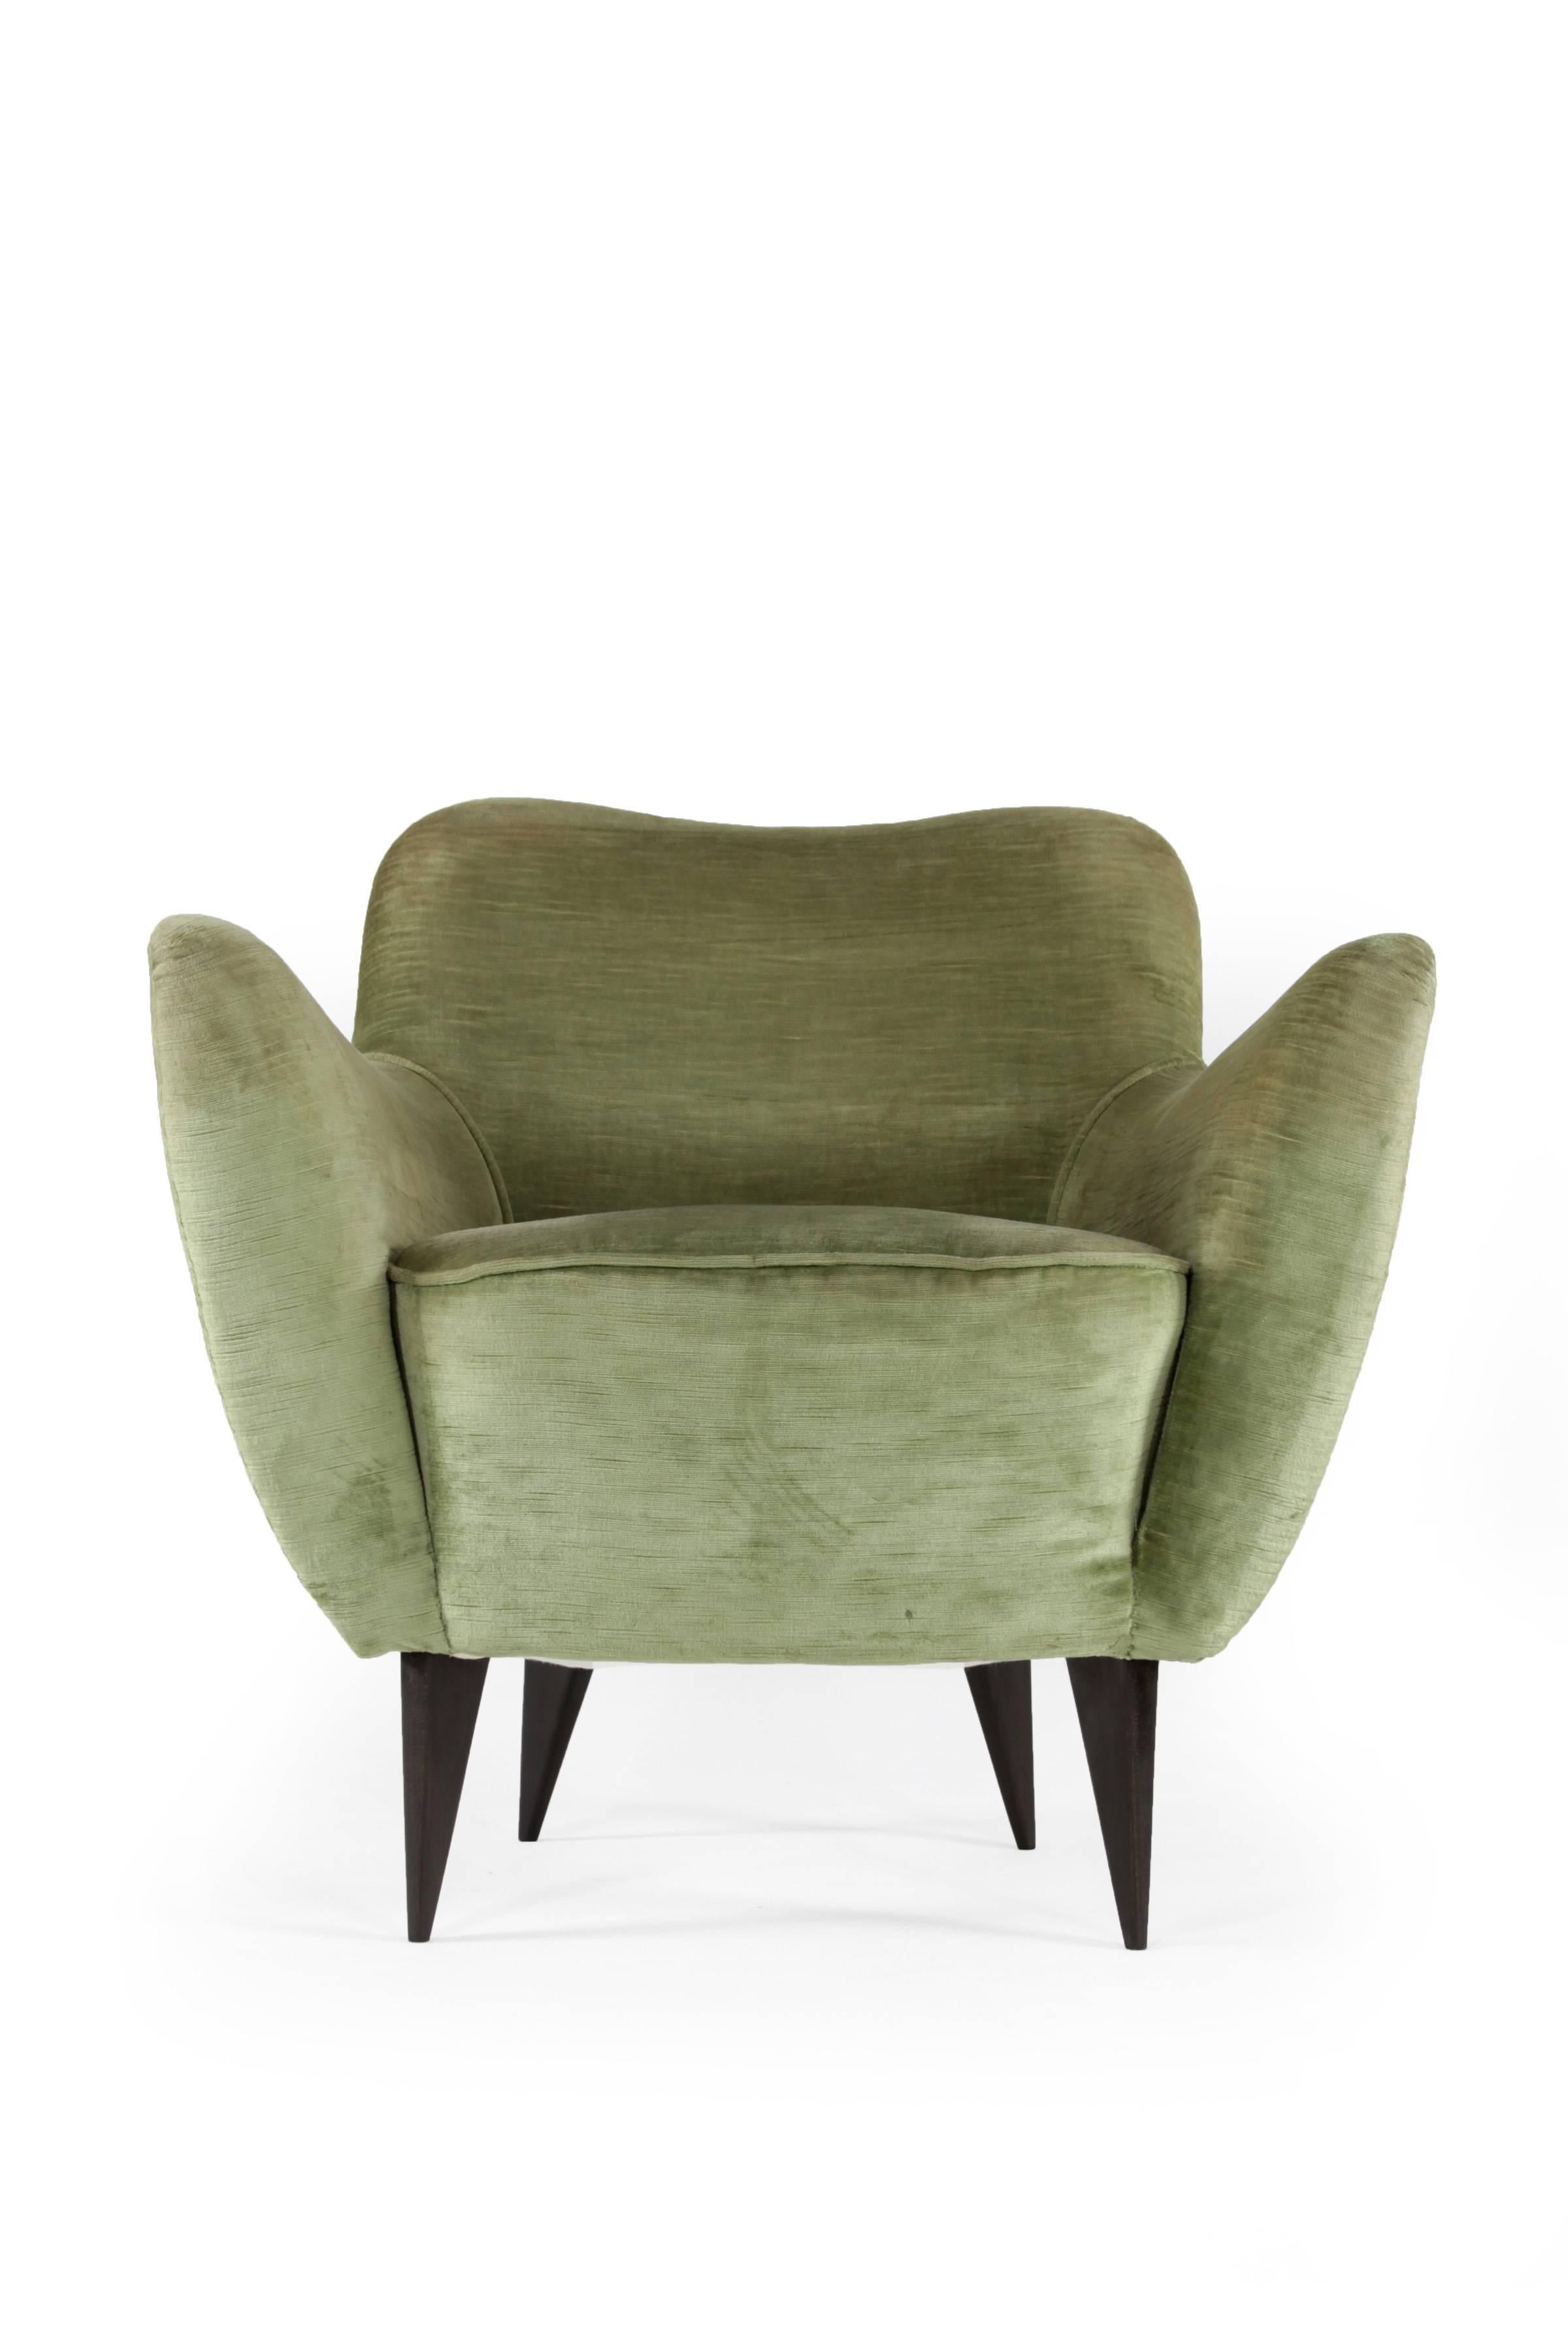 Italian armchair from 1950. Designed by Giulia Veronesi and made by I.S.A. Bergamo. Chair with olive green velvet fabric with some signs of use.